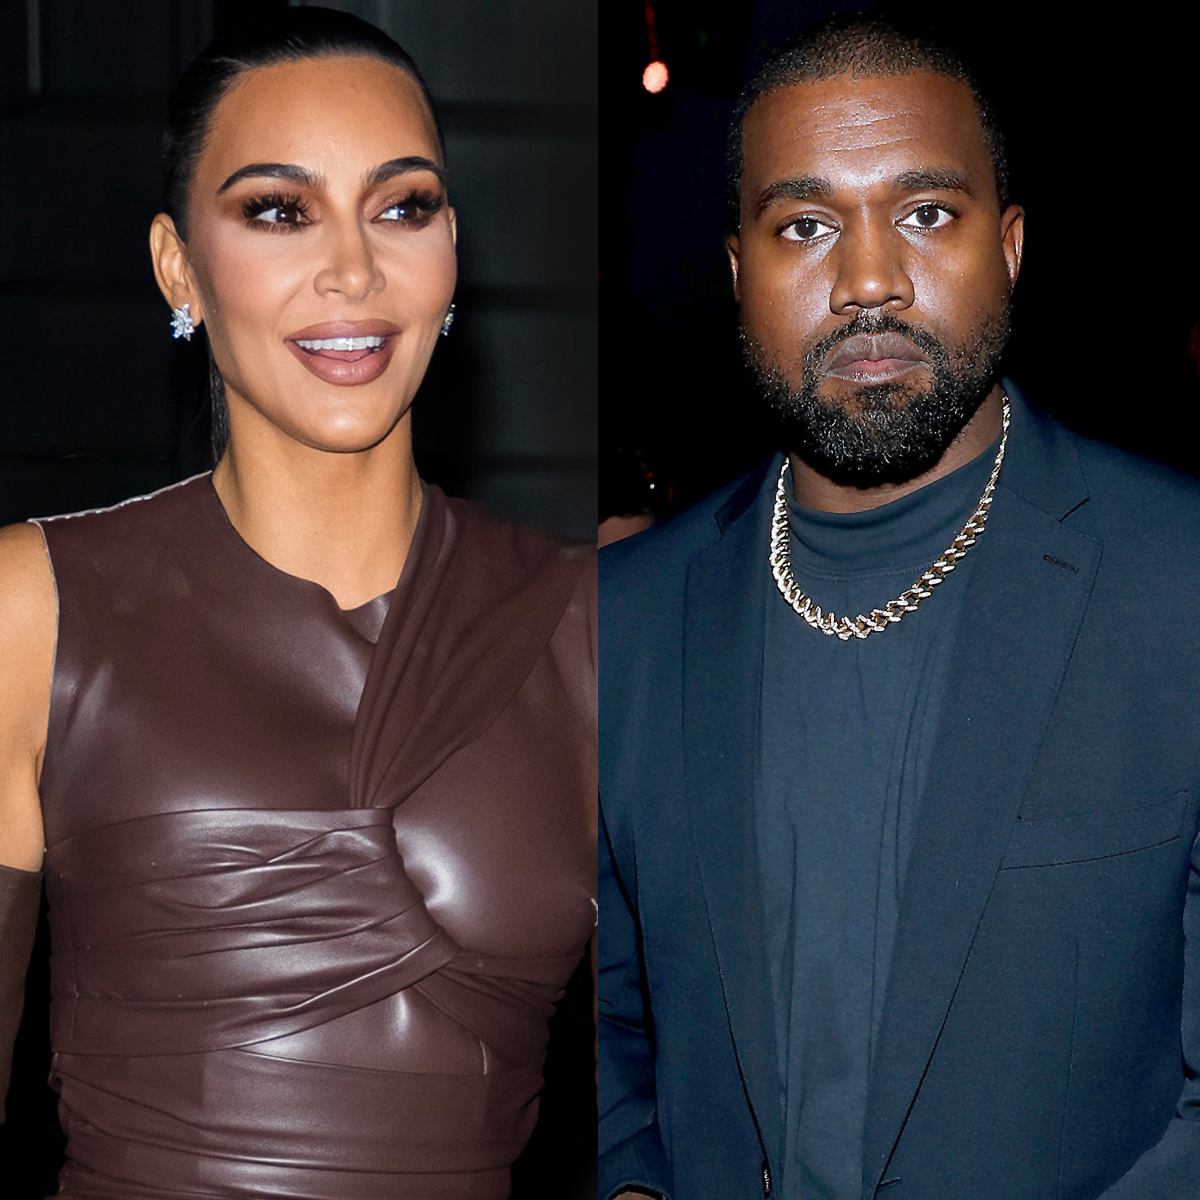 Why Kim Kardashian Knew Filing for Divorce “Had to Be Done”